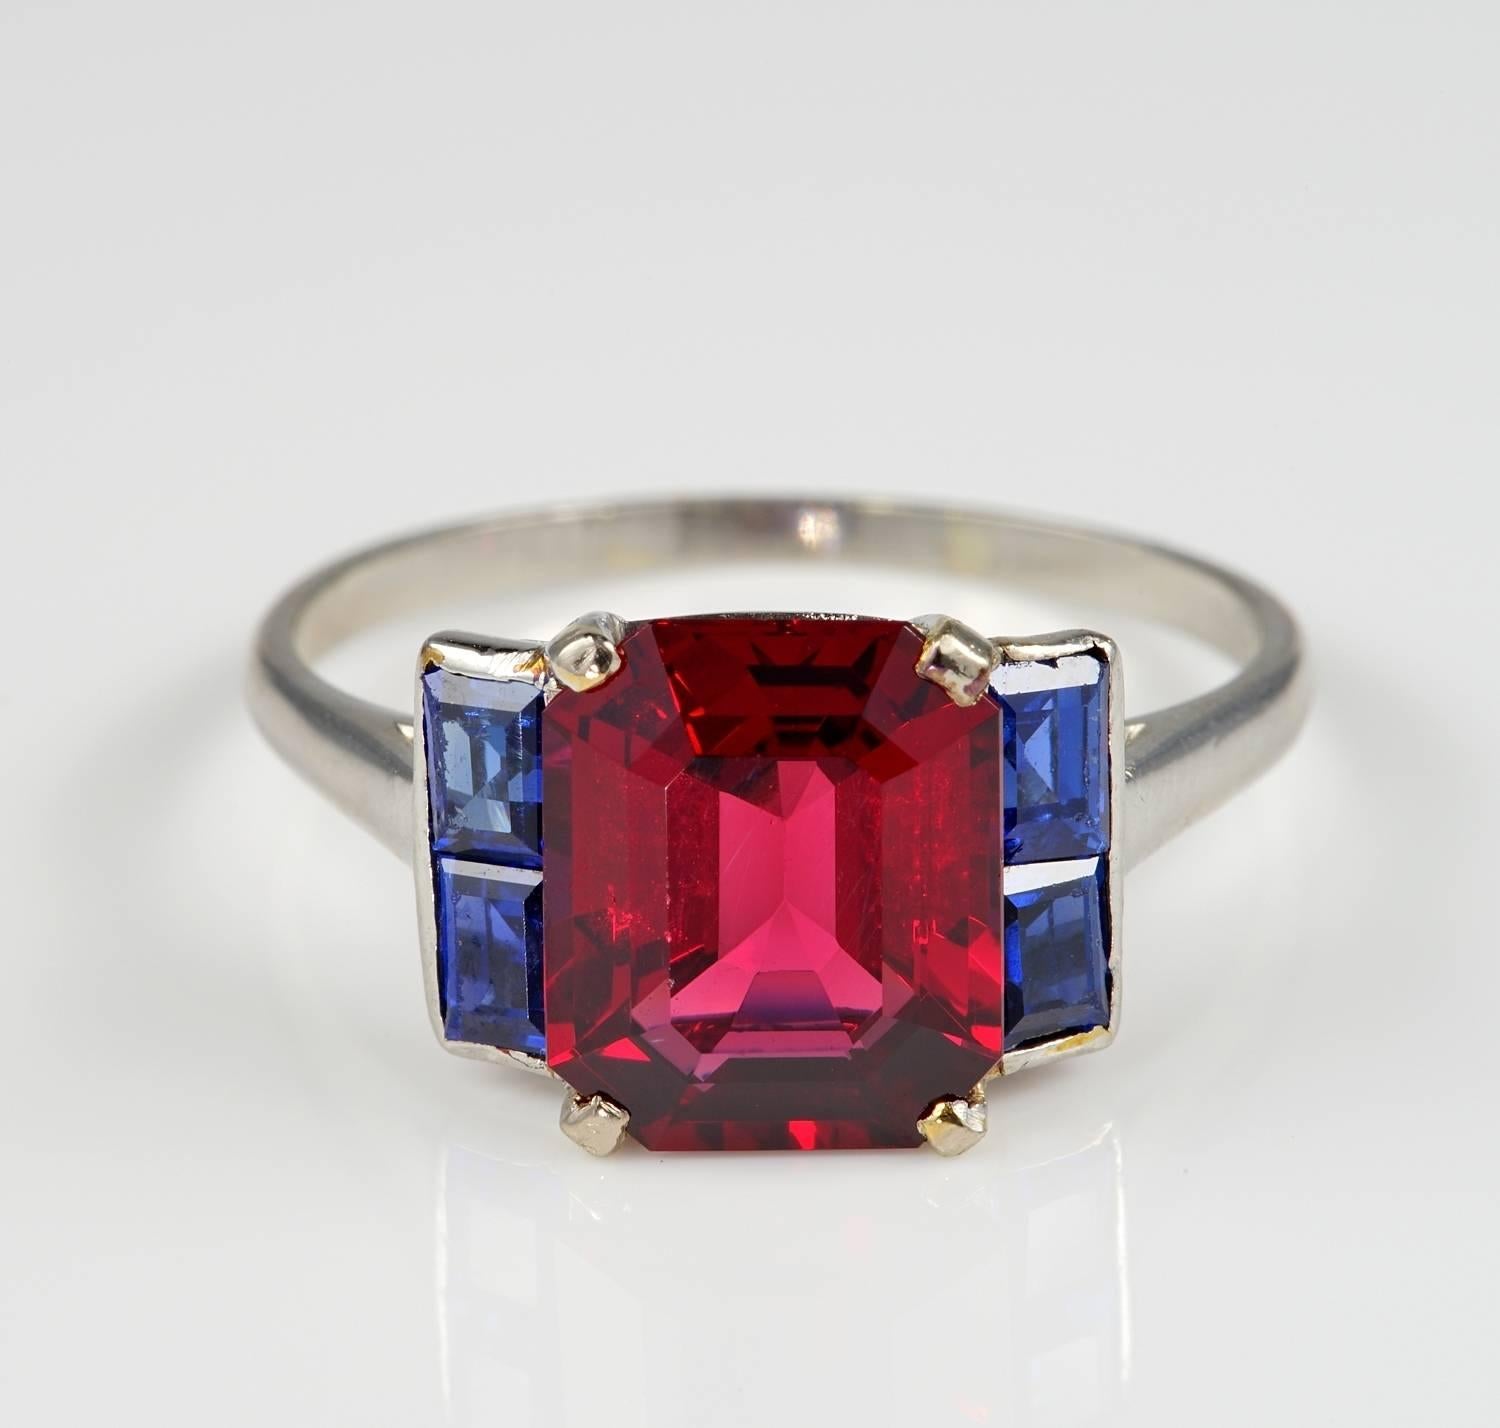 High end Art Deco ring!

Spinel has long been a favorite of gem dealers, but in recent years it has become very popular with gem collectors and jewelry lovers as well. Because the supply of natural spinel is very limited, you are unlikely to find it